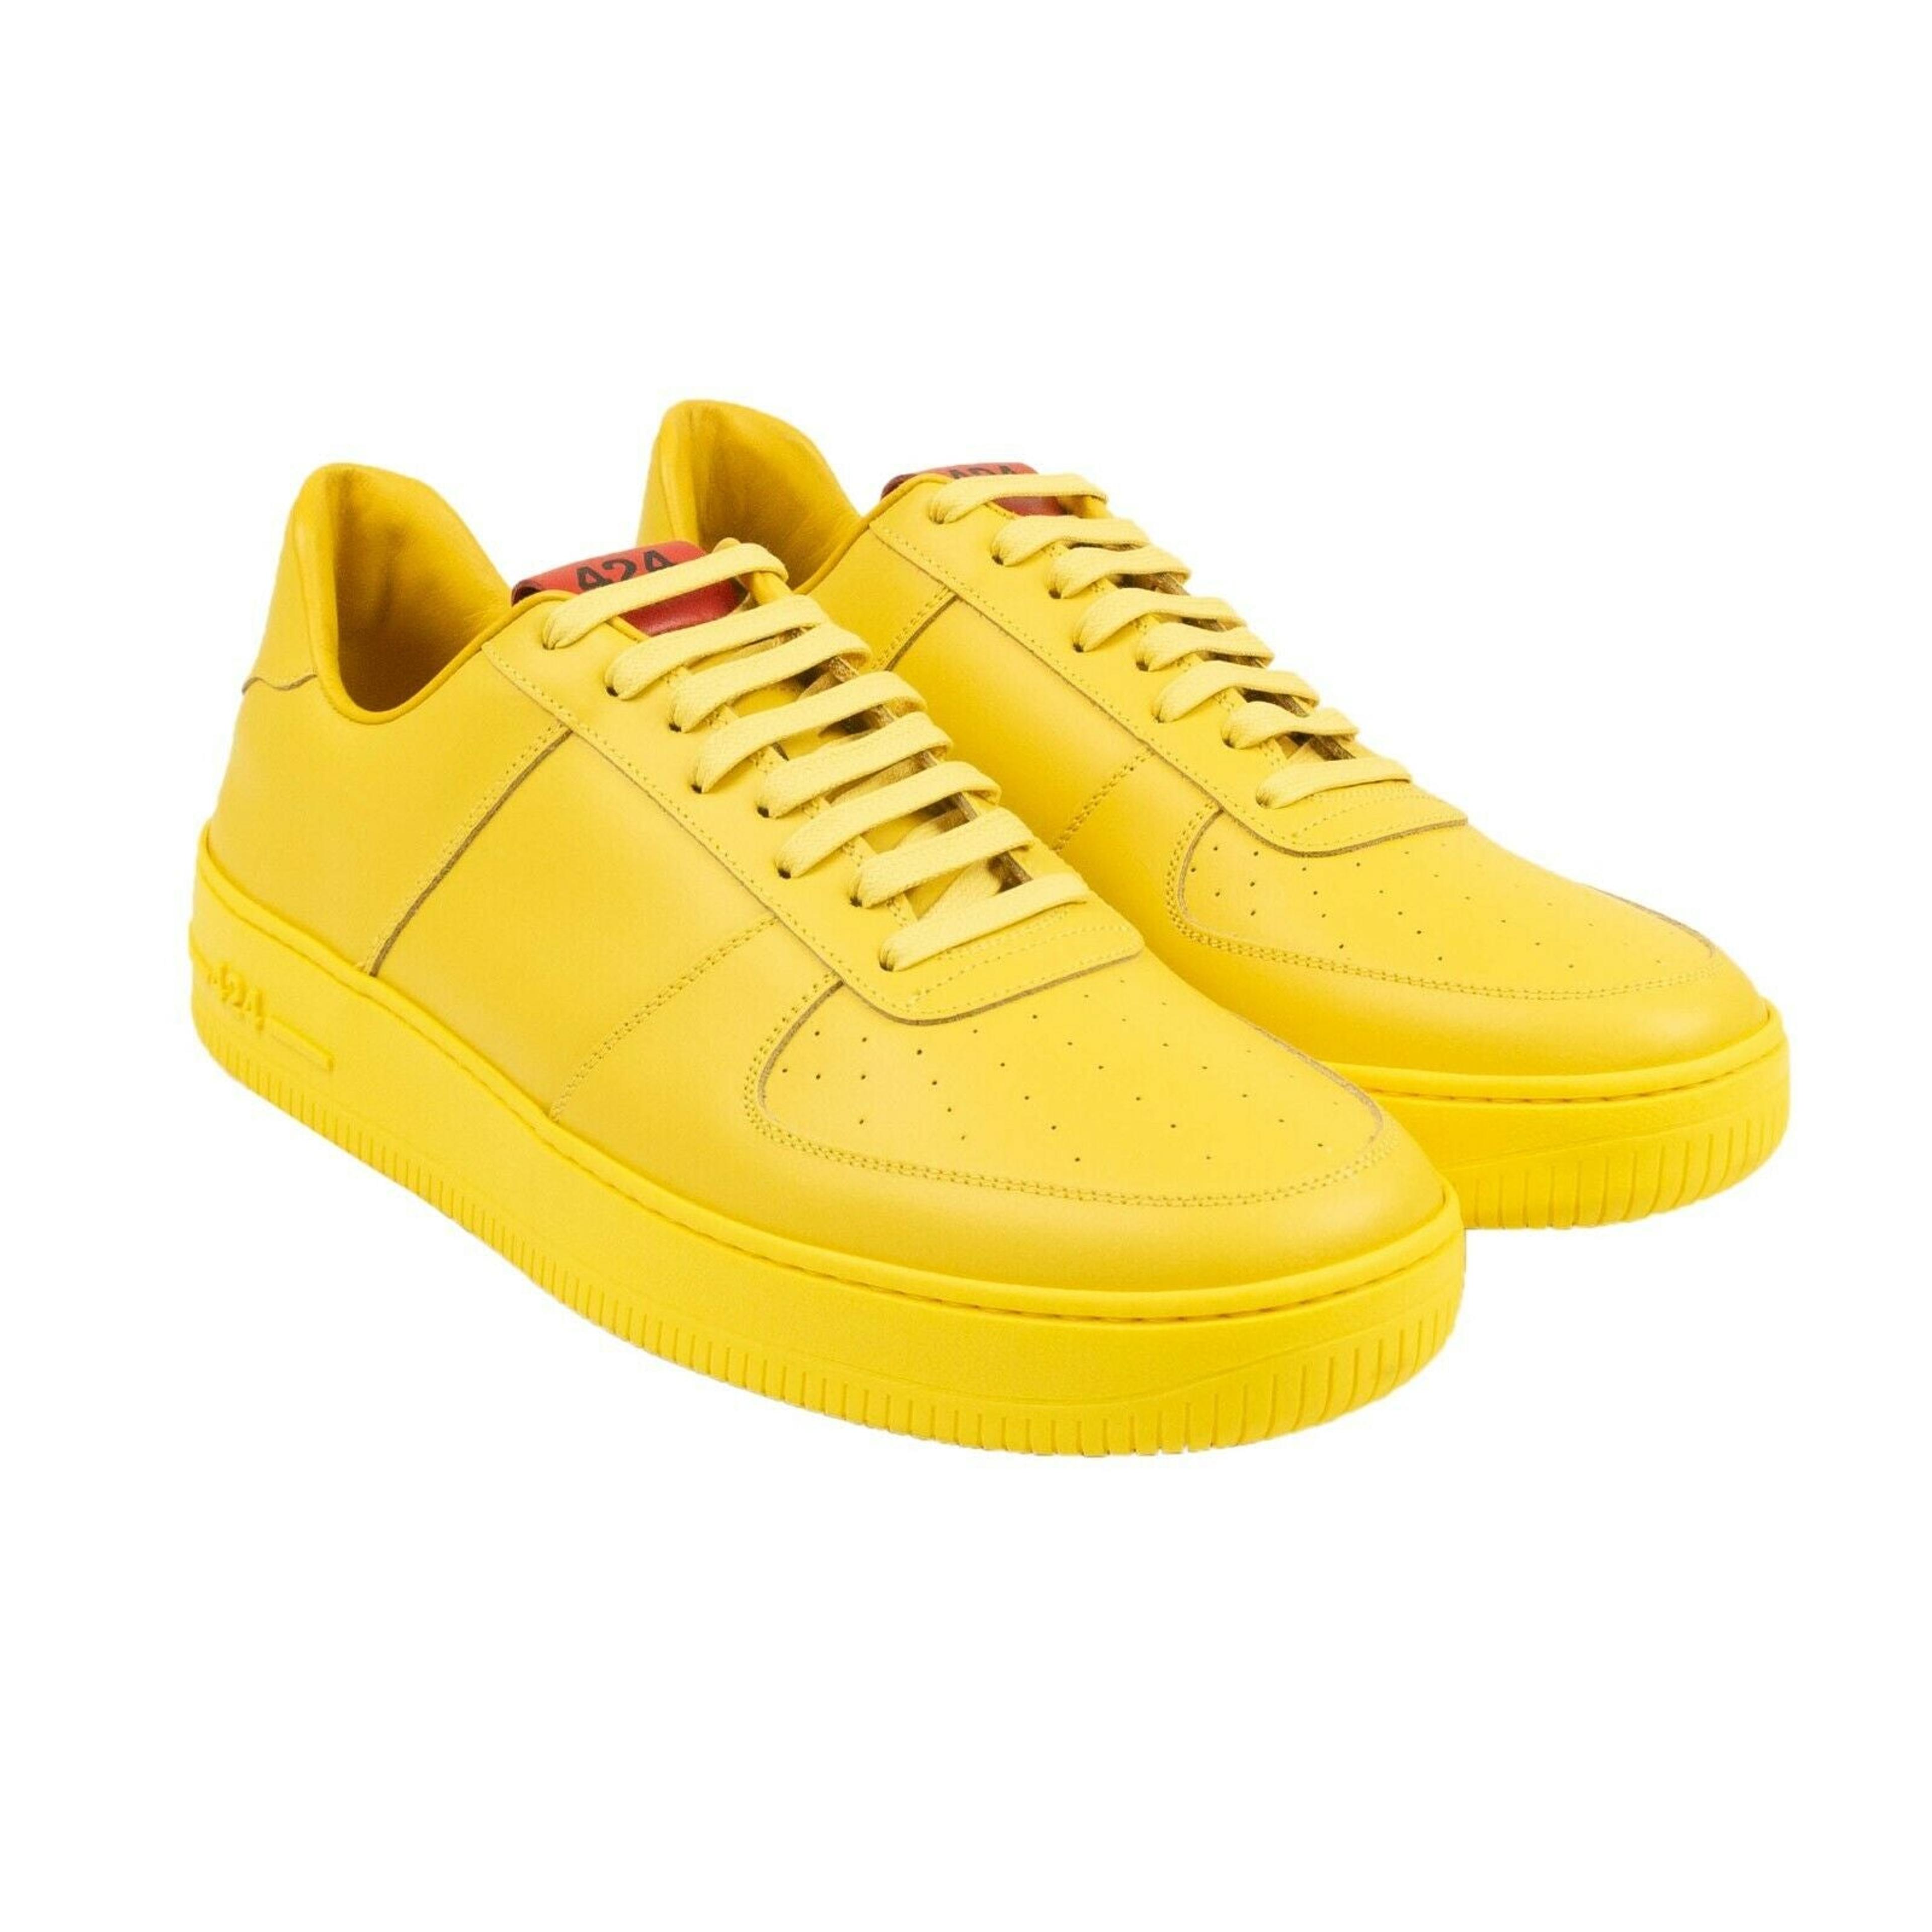 Alternate View 2 of Yellow Leather Low Top Sneakers